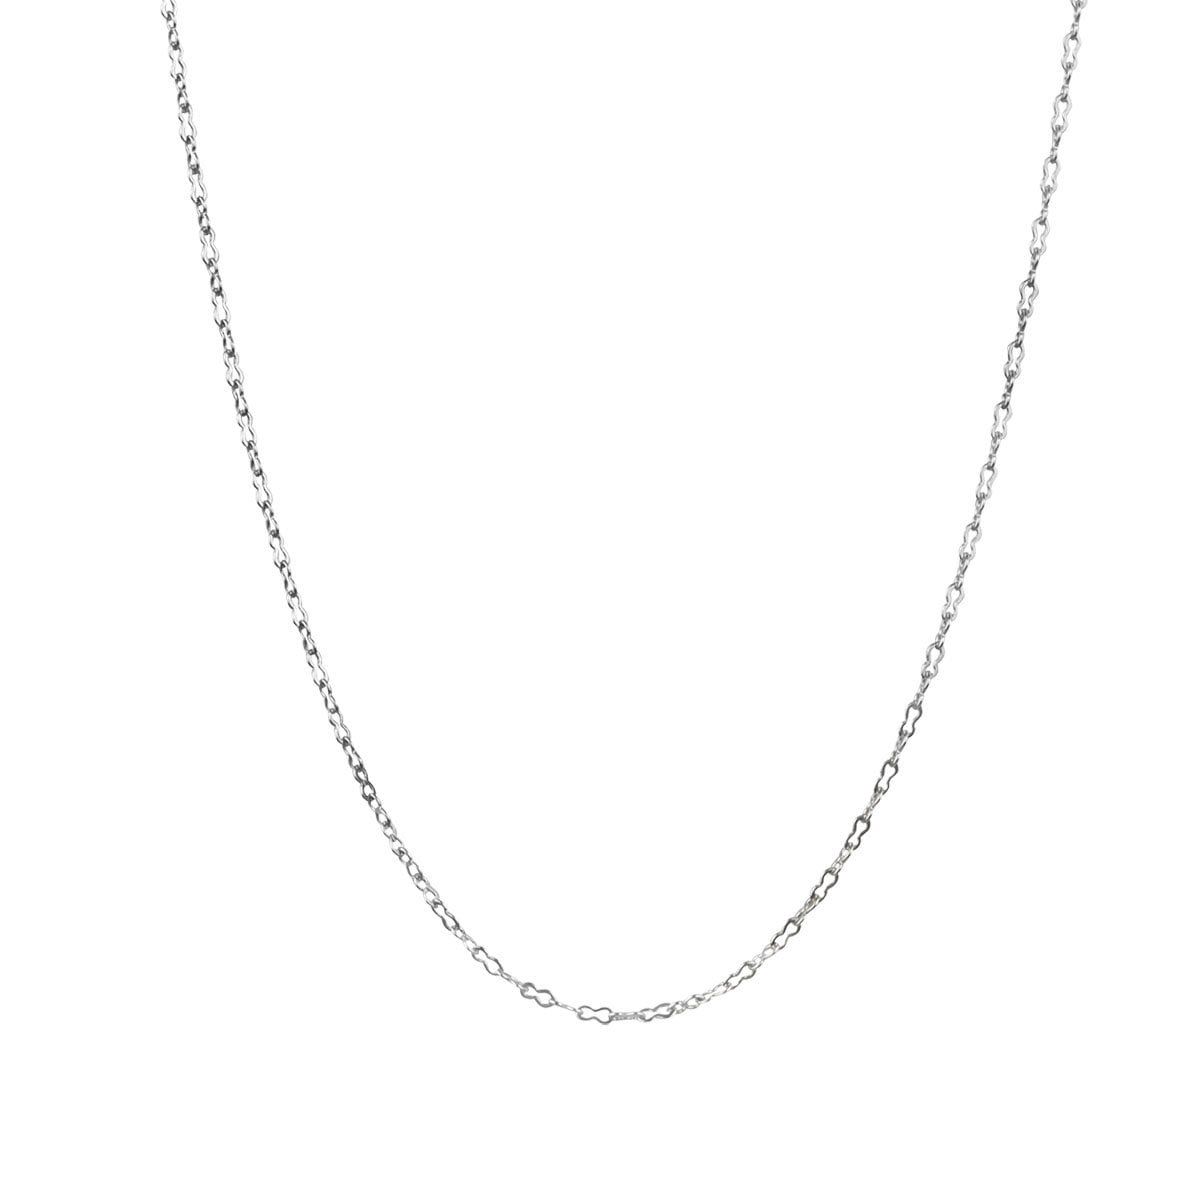 18ct White Gold Crinkle Oval Link Chain